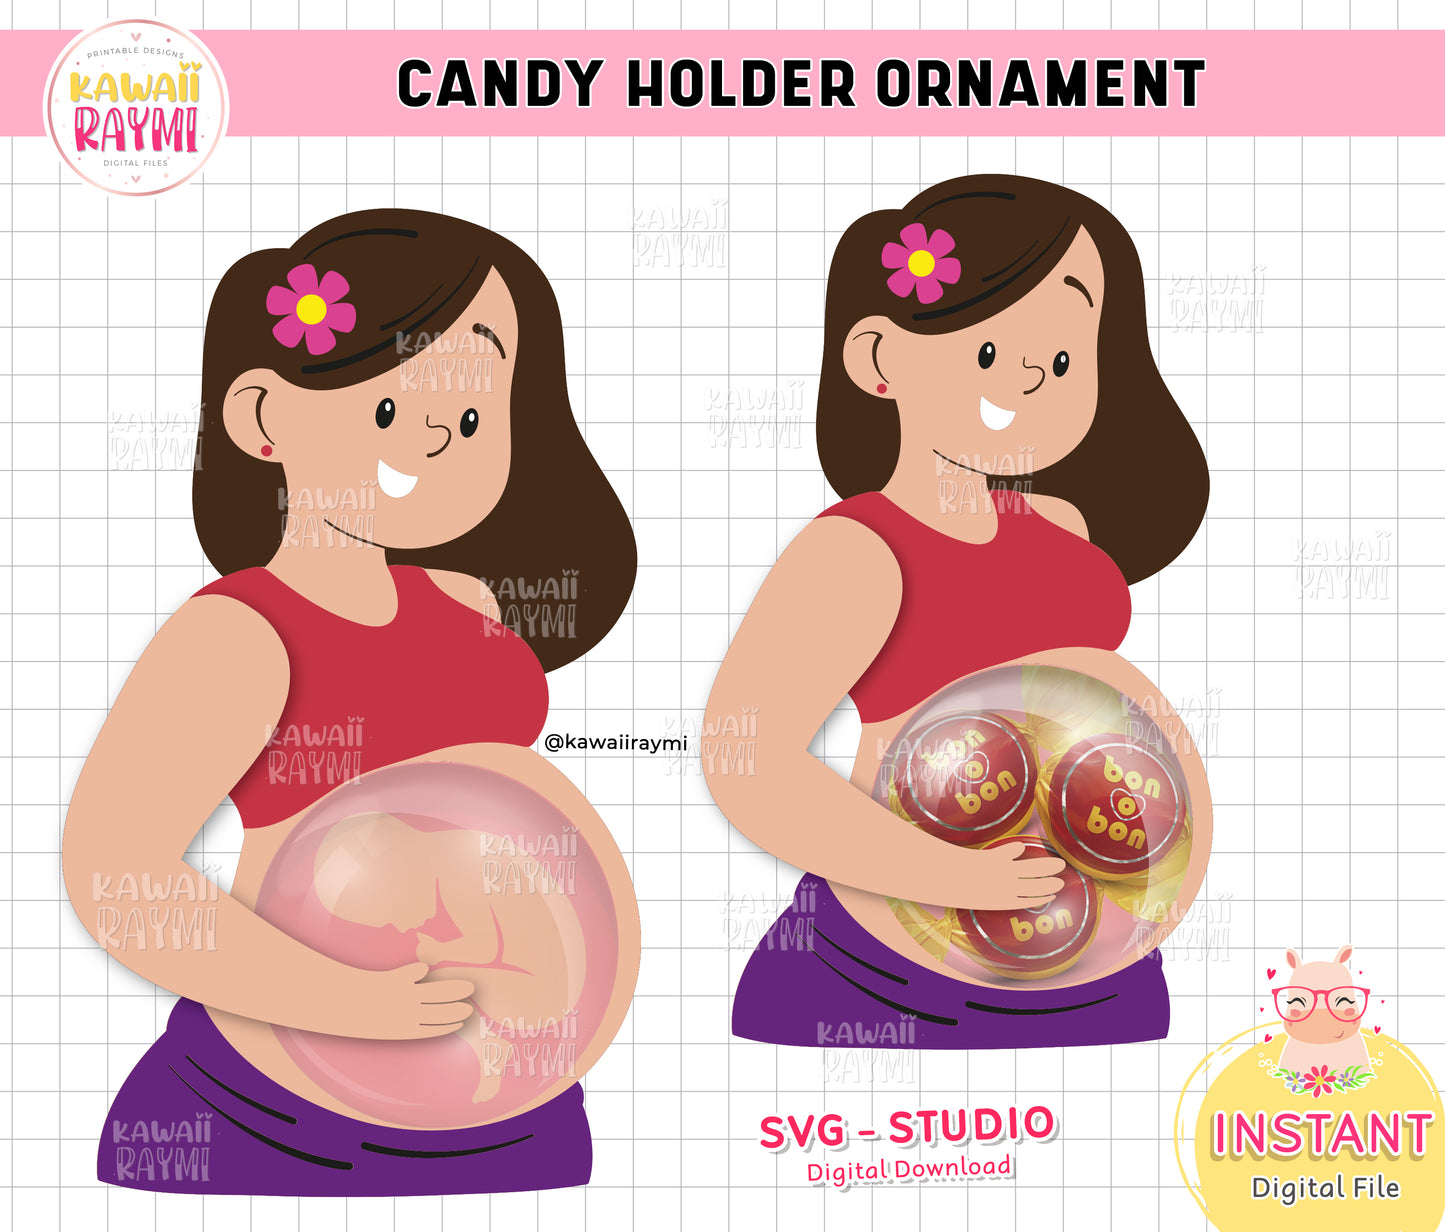 Mothers Day Candy holder ornament /Baby Shower Candy Holder/ Mothers Day papercrafts/Candy ornament/ Cricut SVG Candy Holder